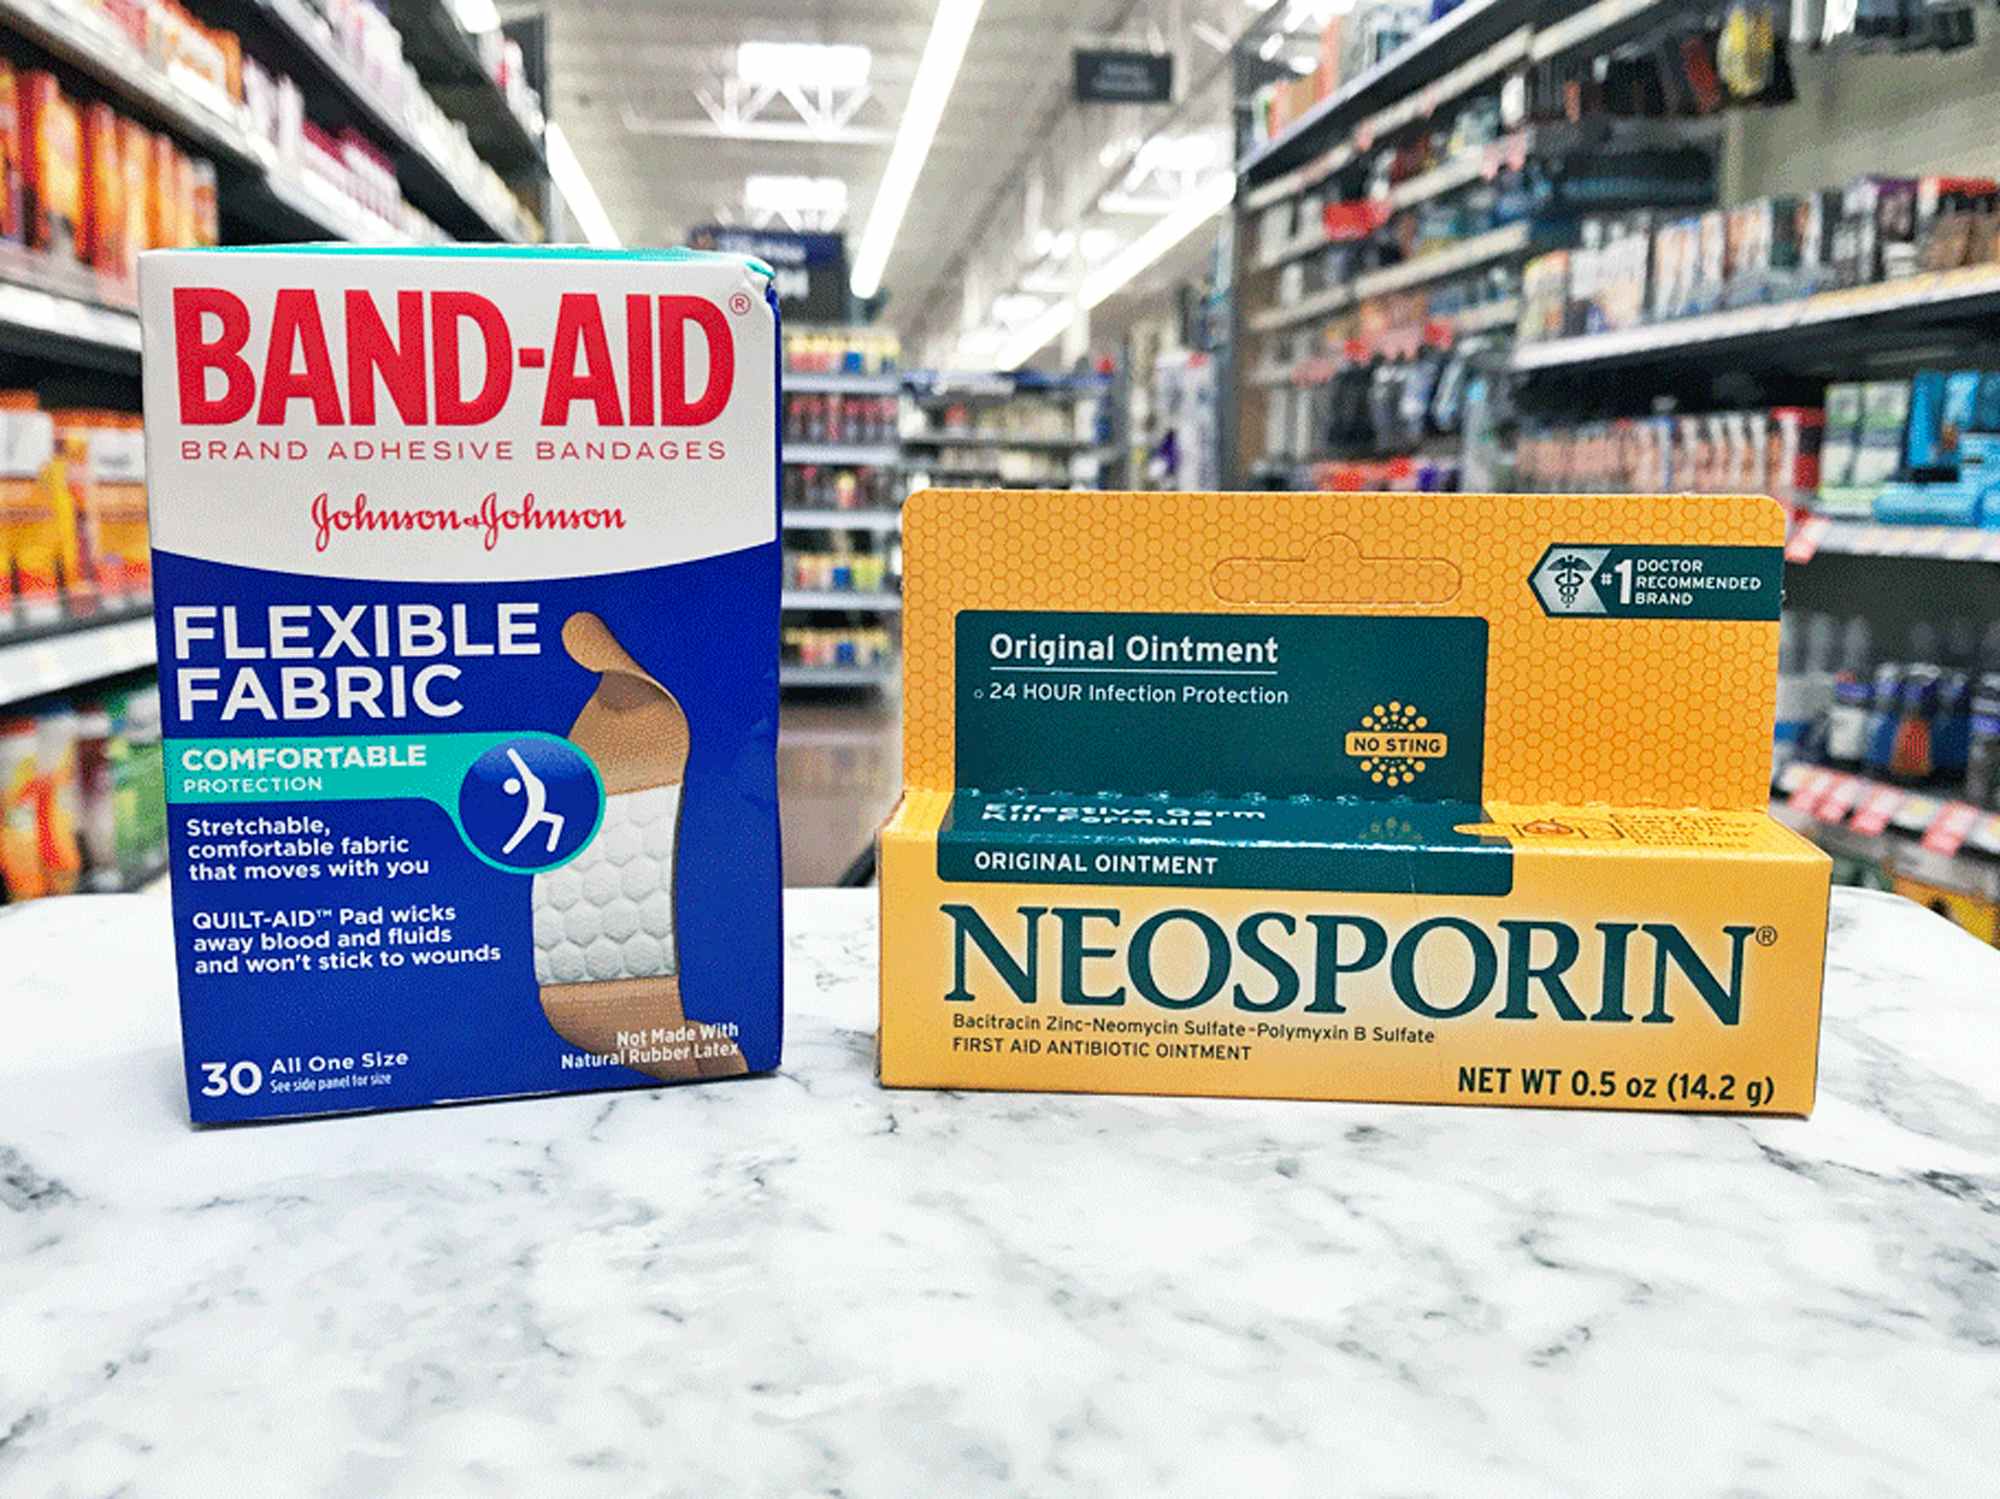 bandaids and Neosporin in a store